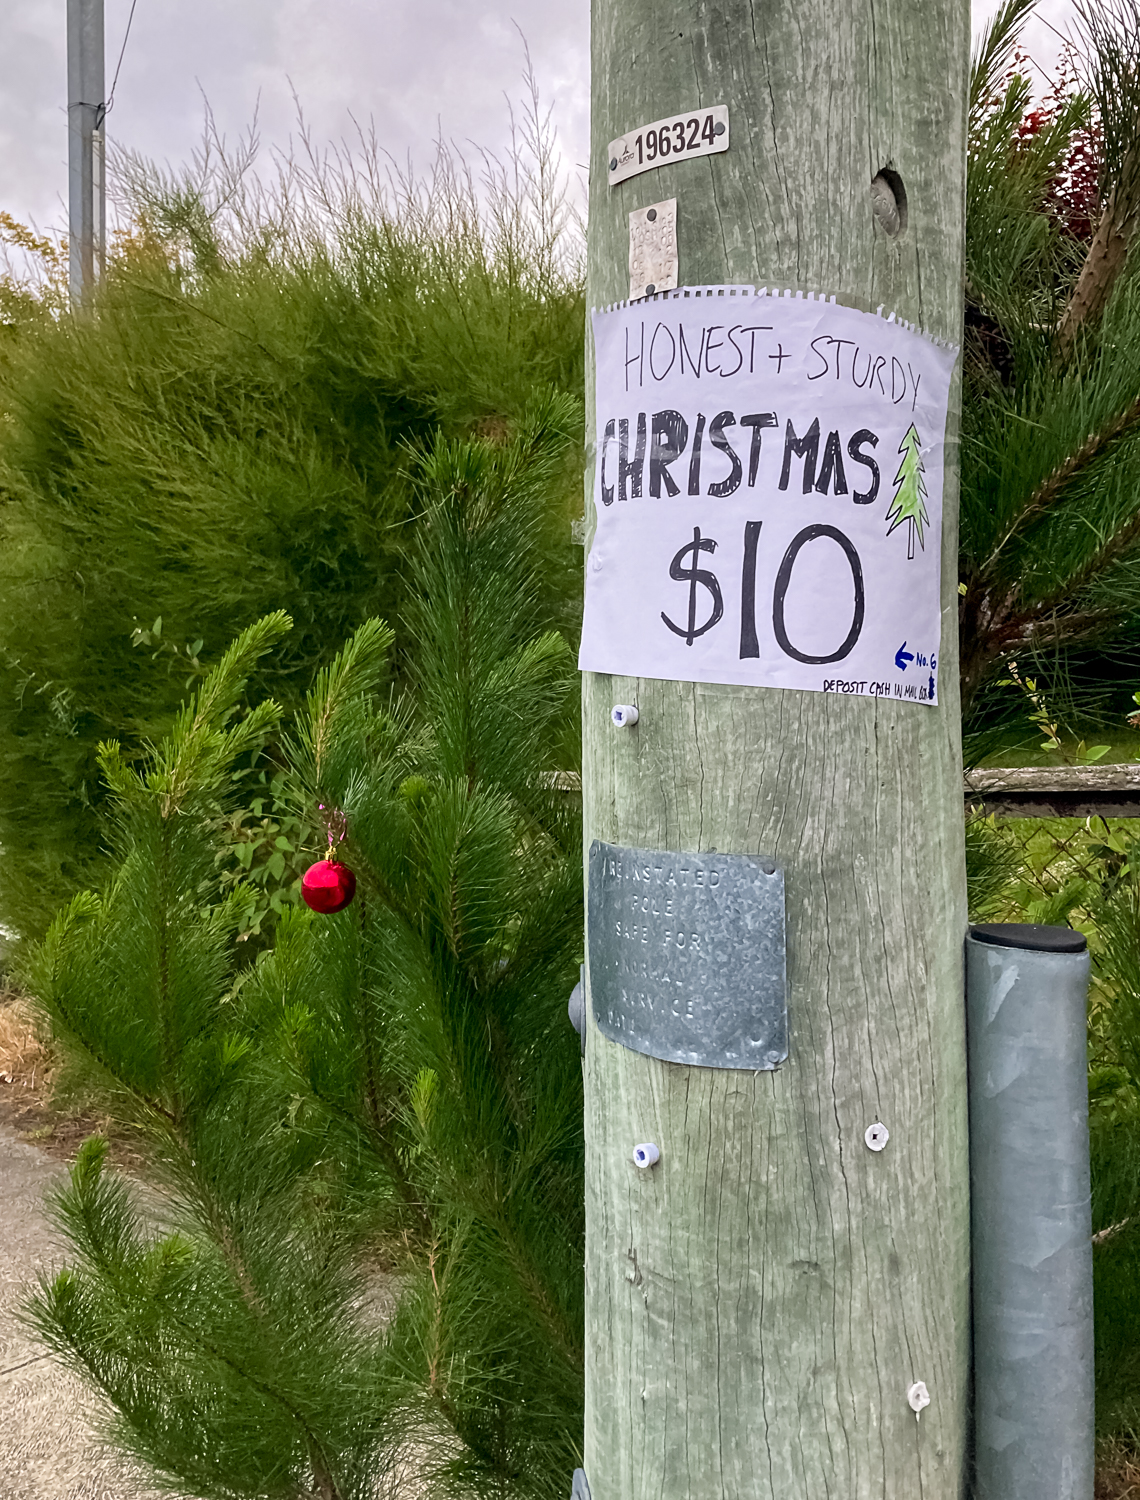 A pole with a hand written sign for "honest and sturdy Christmas tree $10", and a Christmas tree propped against it